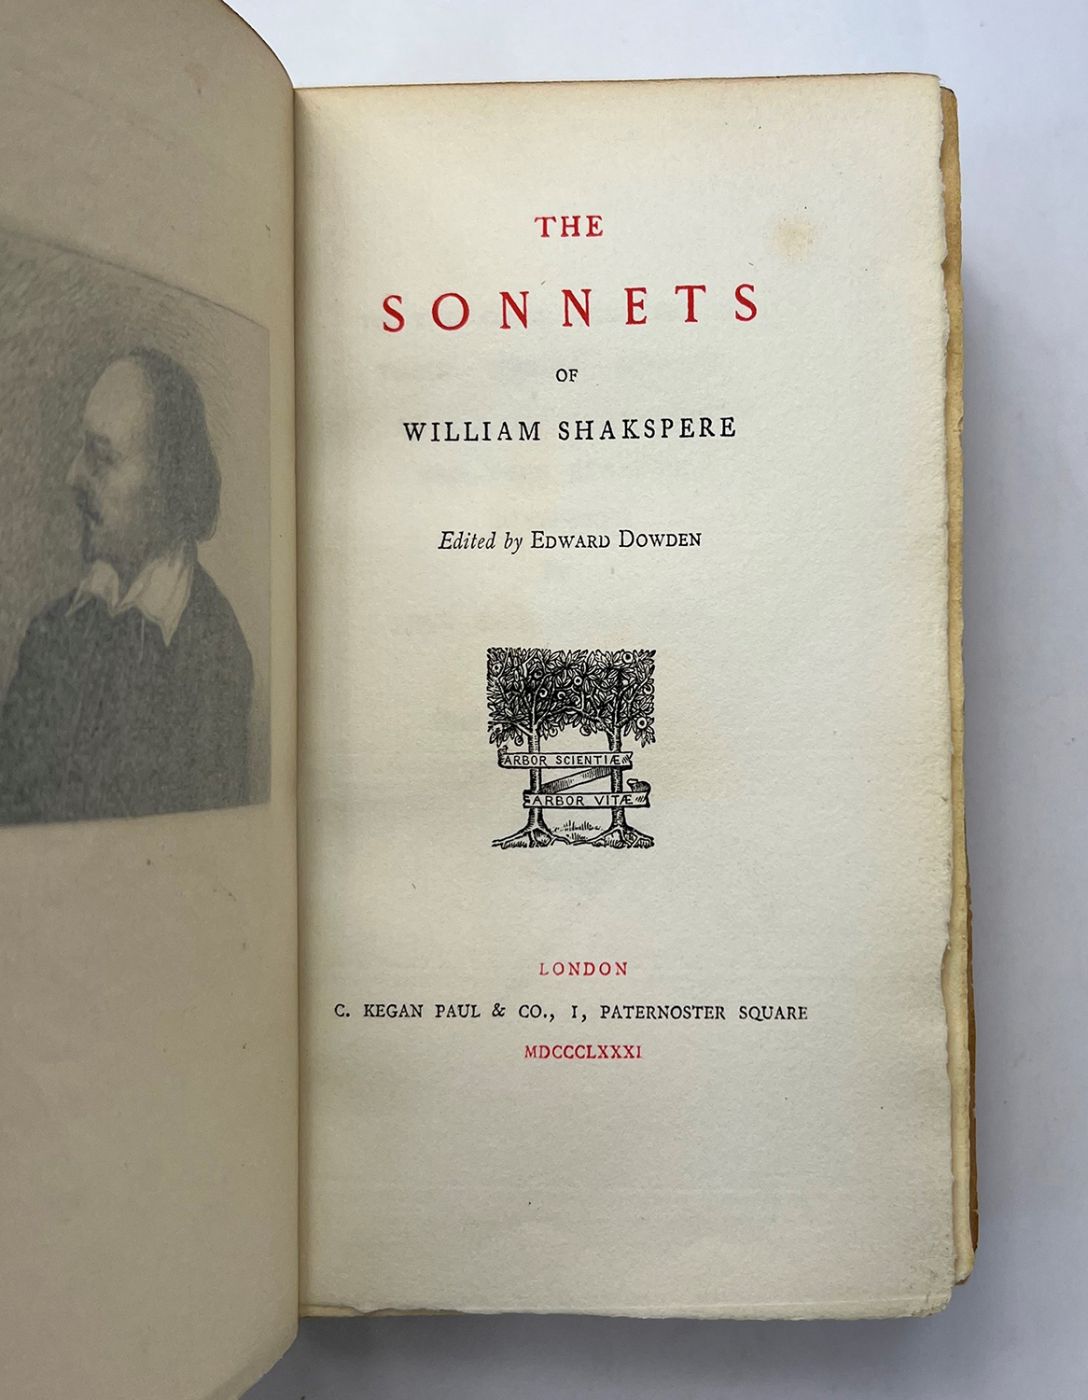 THE SONNETS OF WILLIAM SHAKESPEARE -  image 5